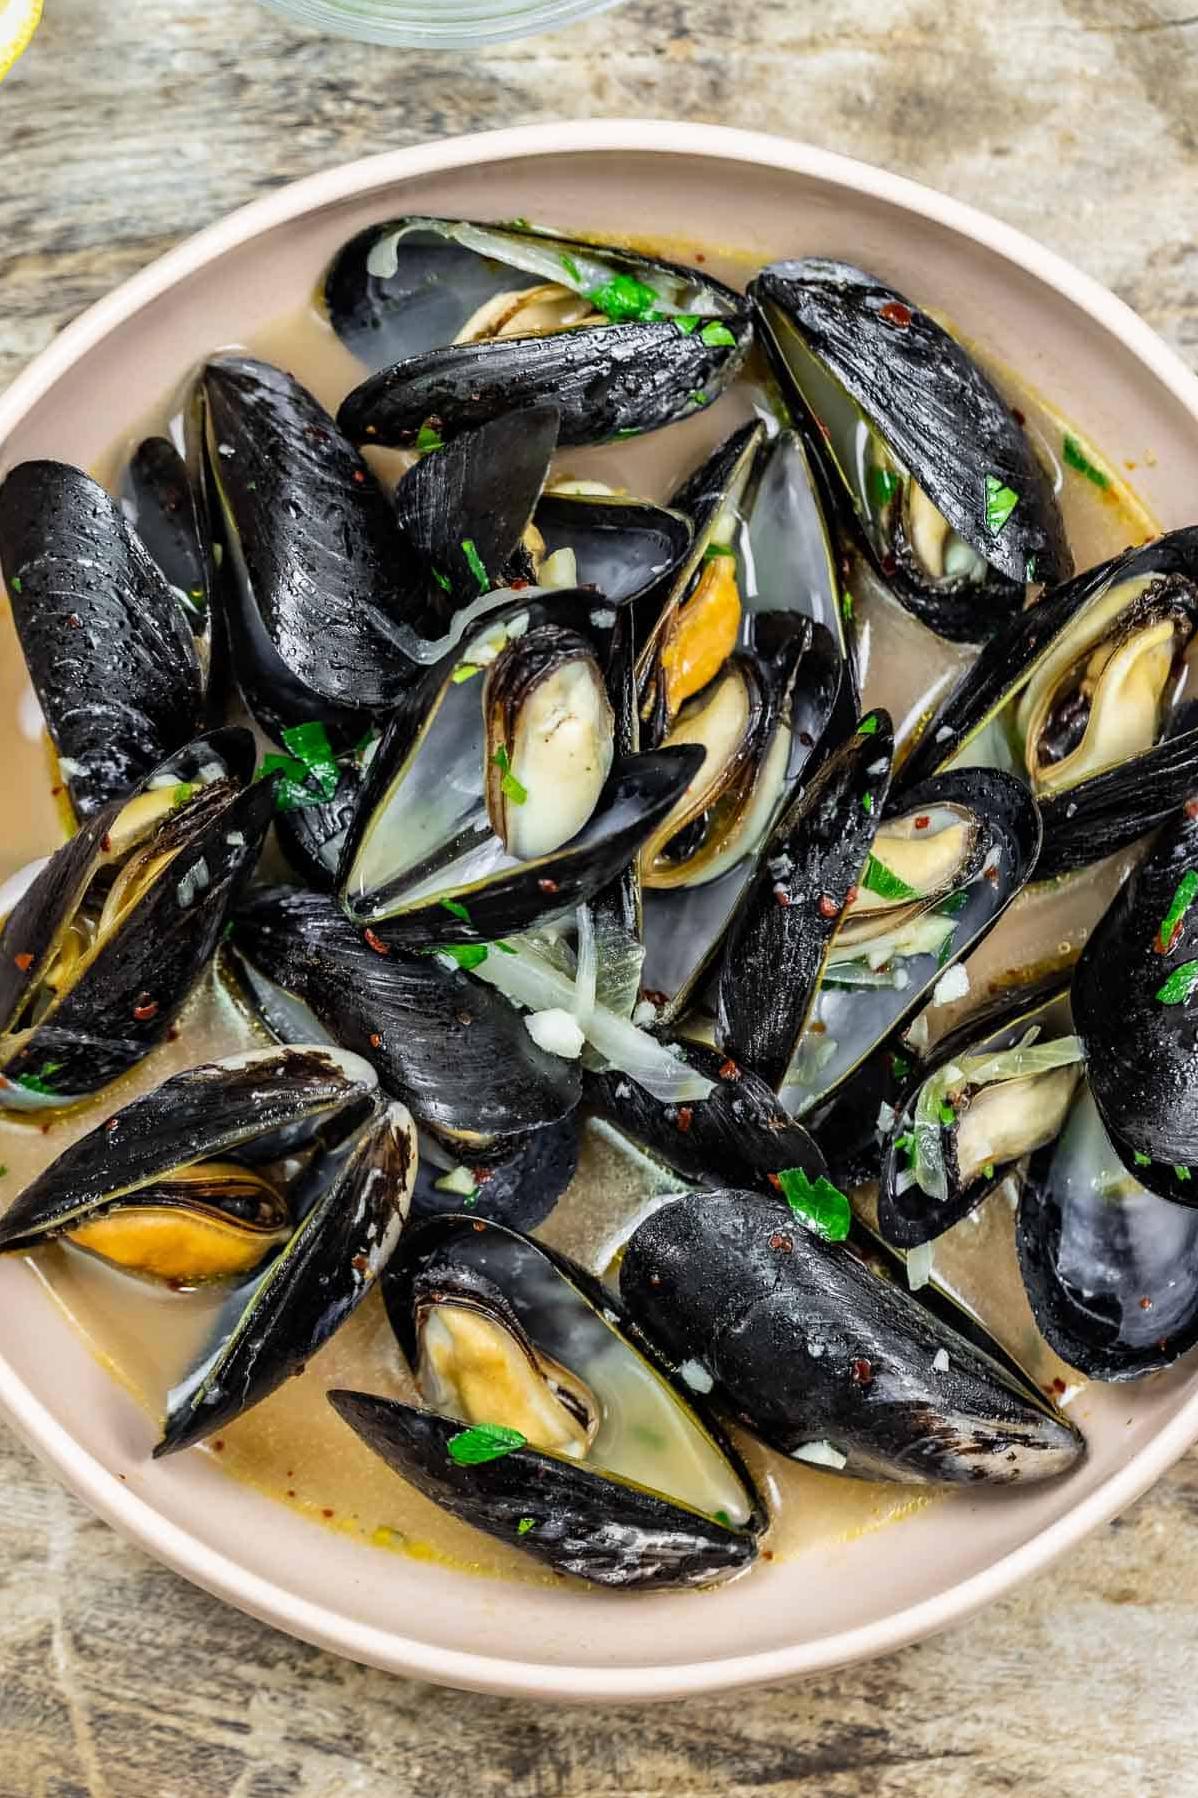  The key to amazing mussels? Quality ingredients and a good white wine!